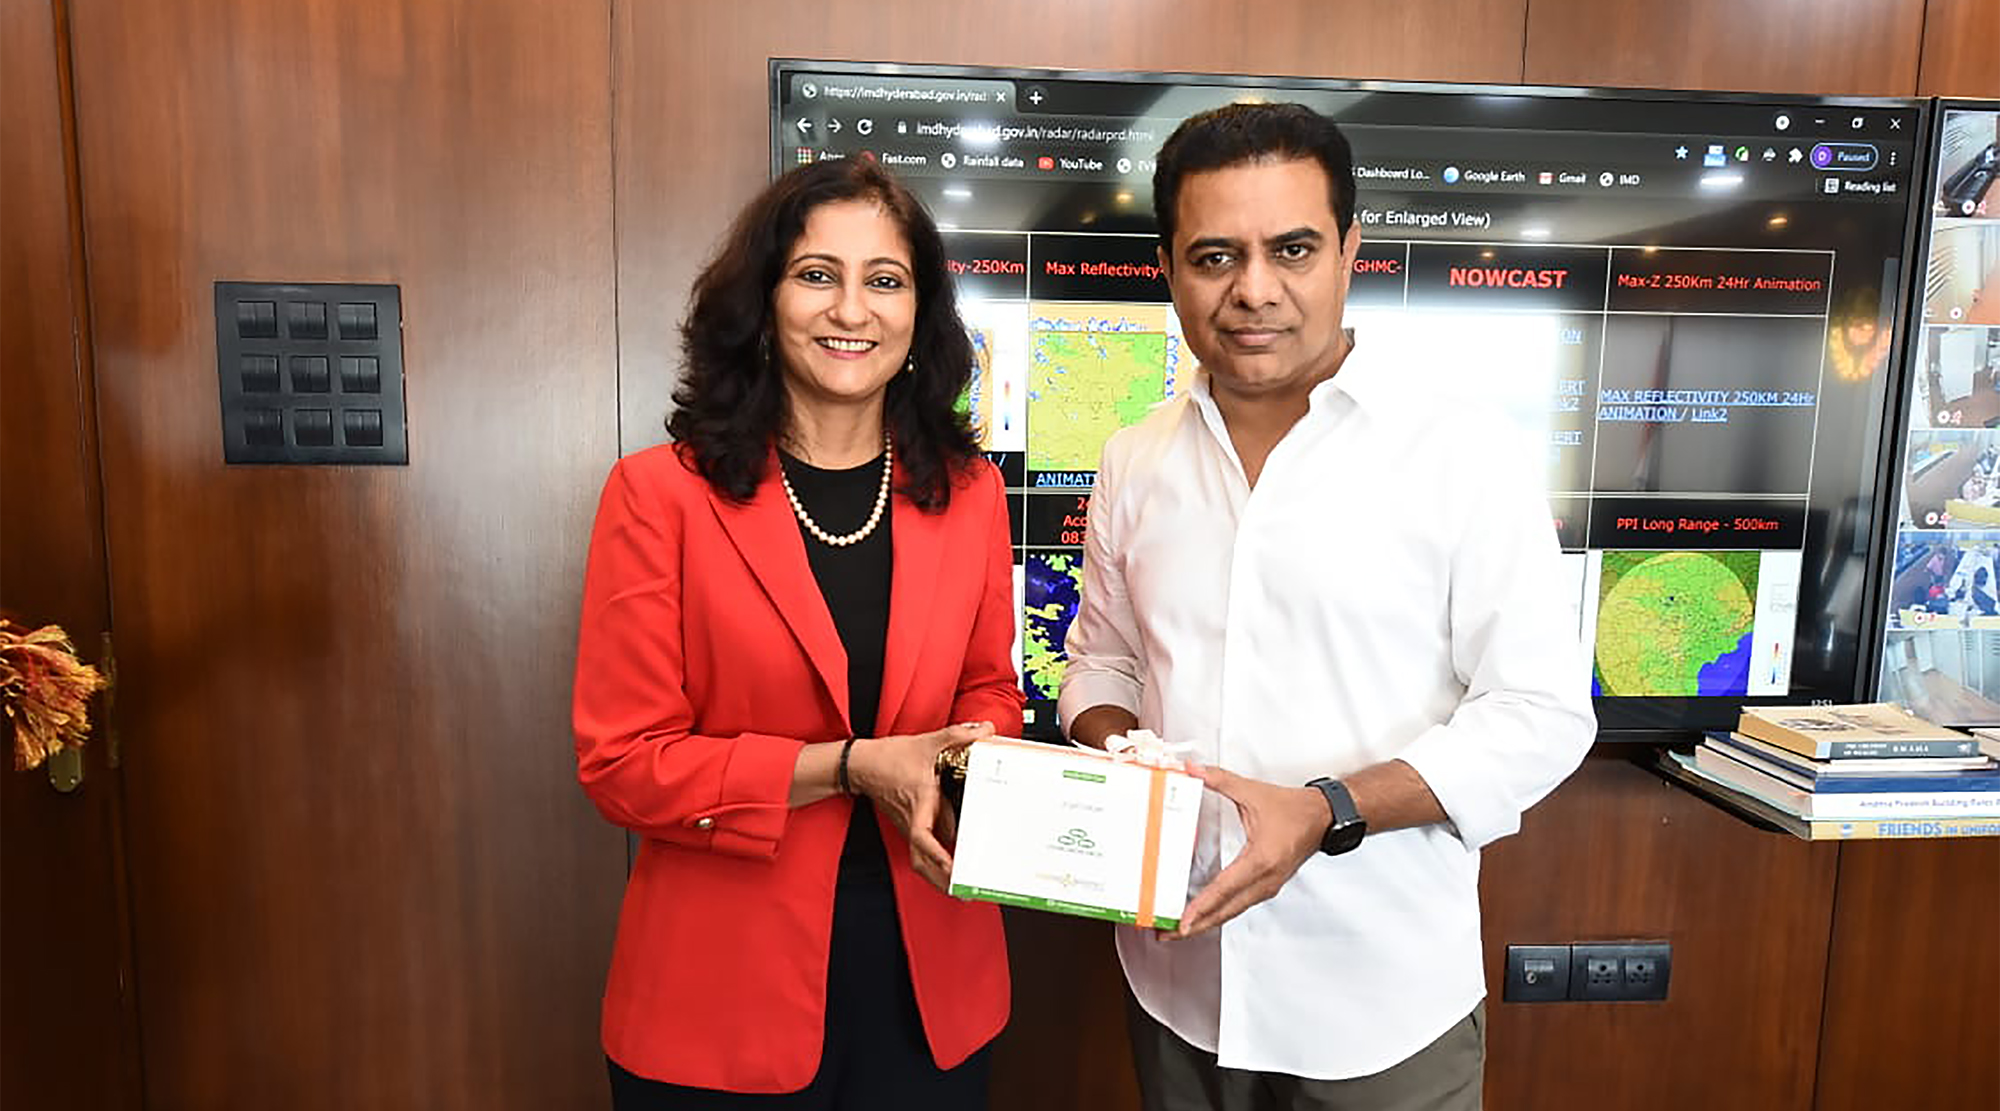 Anu Acharya, Founder and CEO of Mapmygenome (left) with Kalvakuntla Taraka Rama Rao, Minister for Municipal Administration & Urban Development, Industries & Commerce, and Information Technology of Telangana (right).